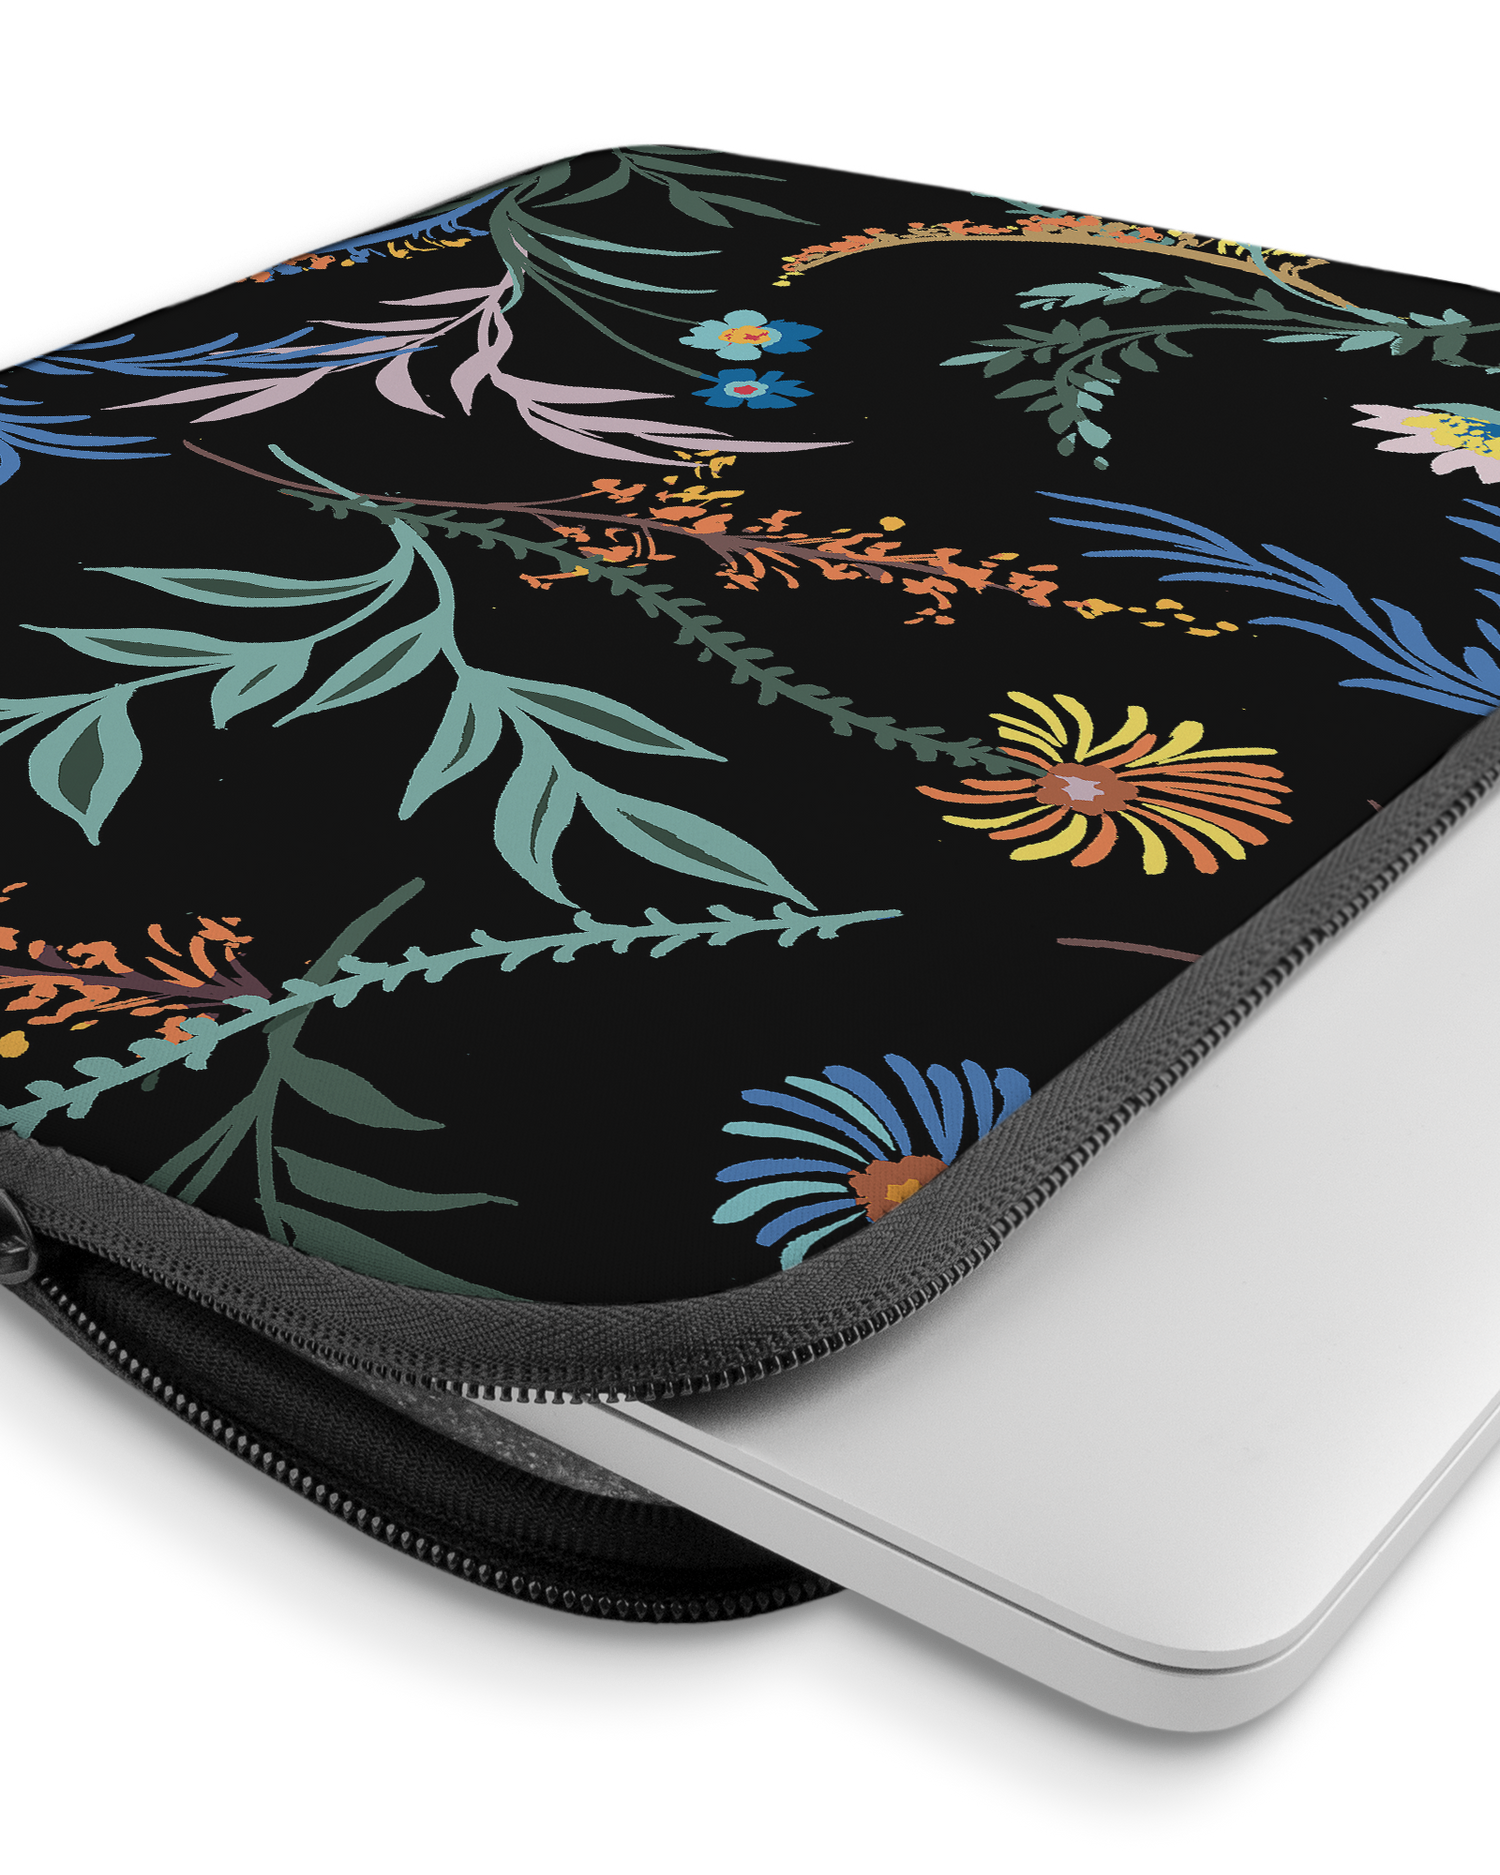 Woodland Spring Floral Laptop Case 15 inch with device inside